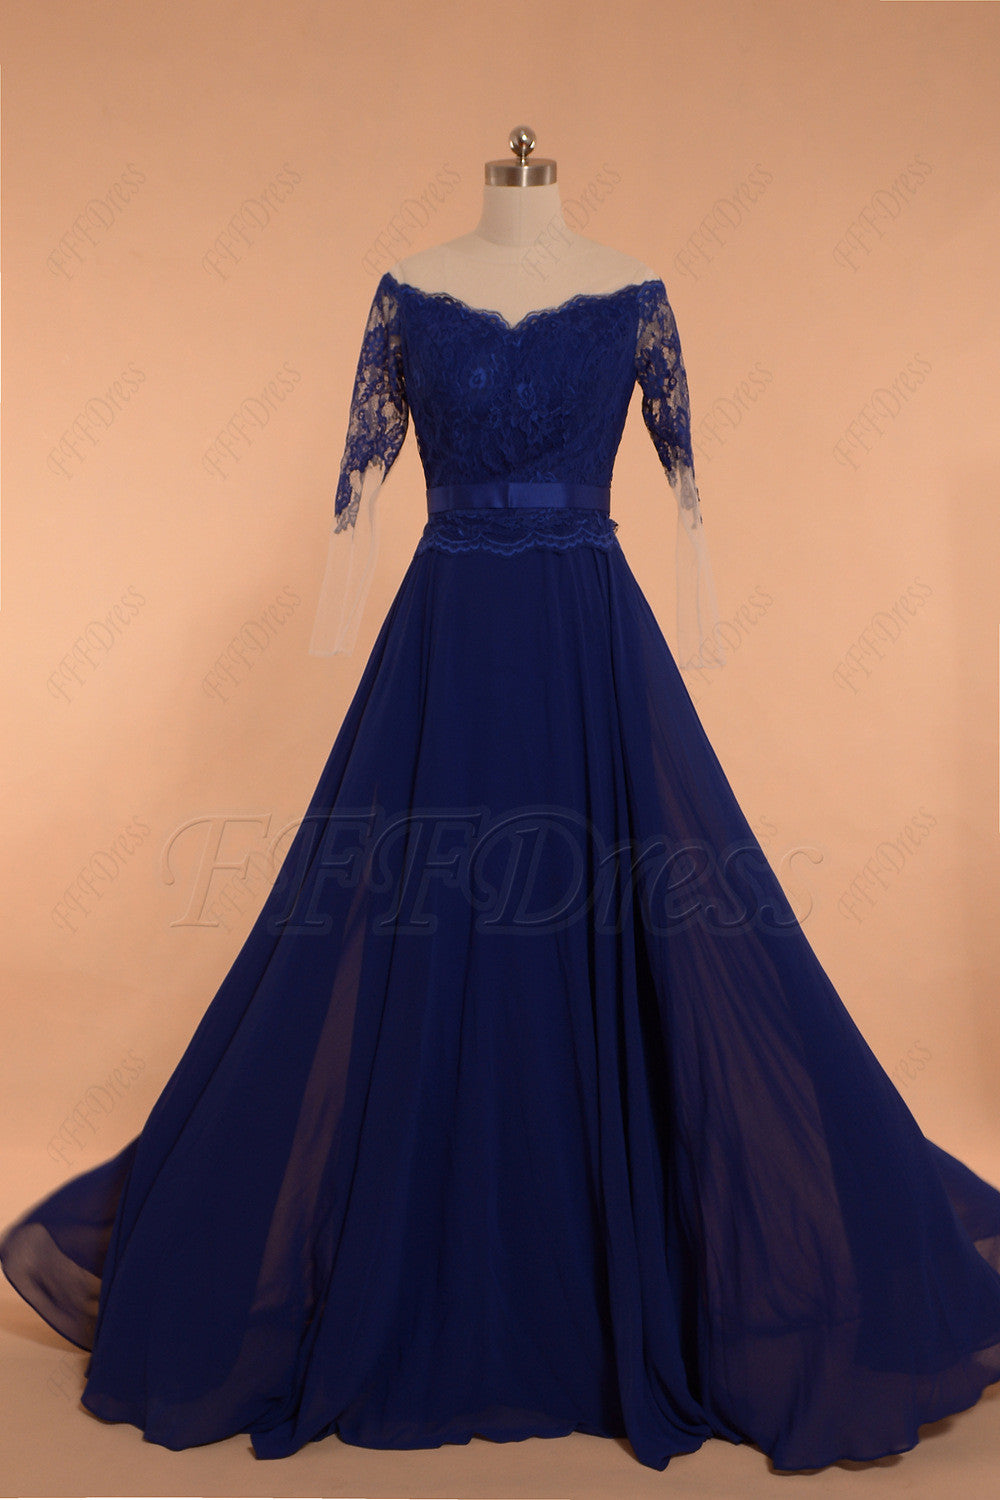 Royal blue mother of the bride dress with sleeves